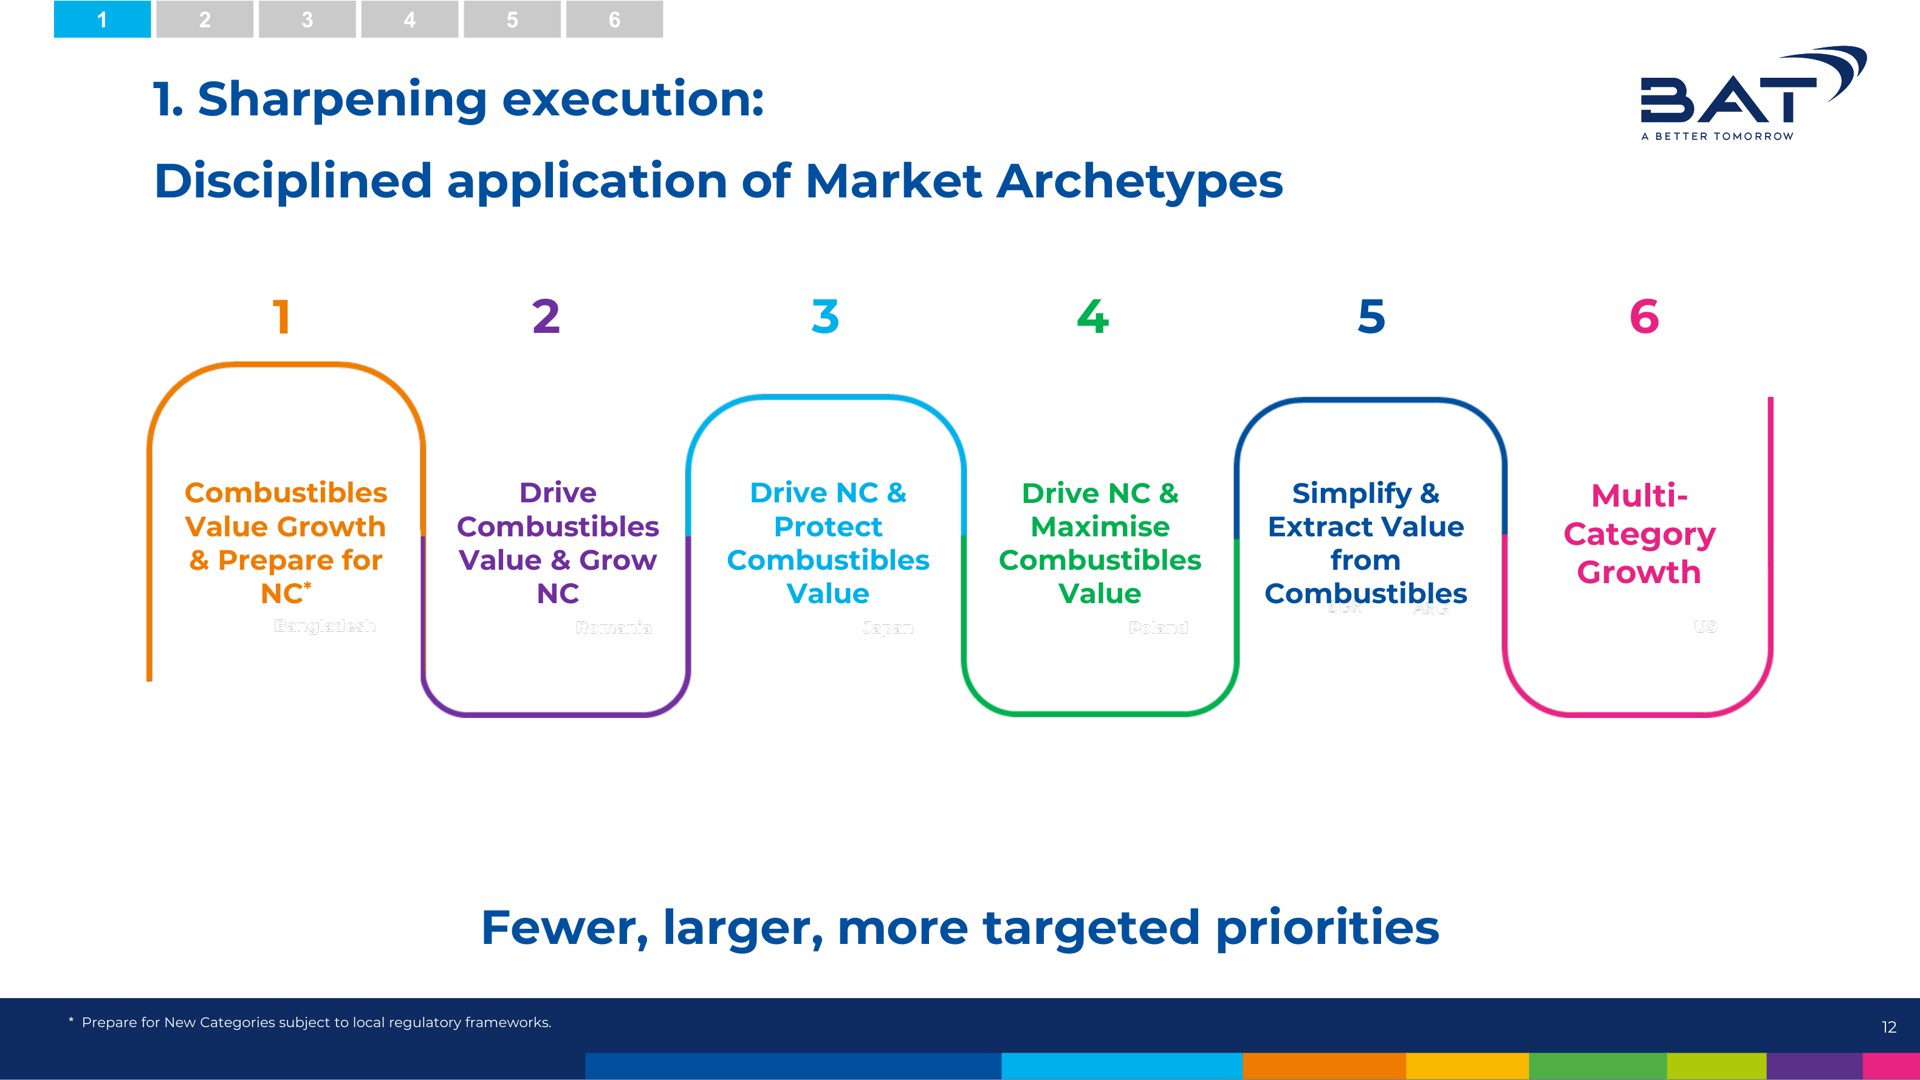 sharpening execution disciplined application of market archetypes more targeted priorities | BAT